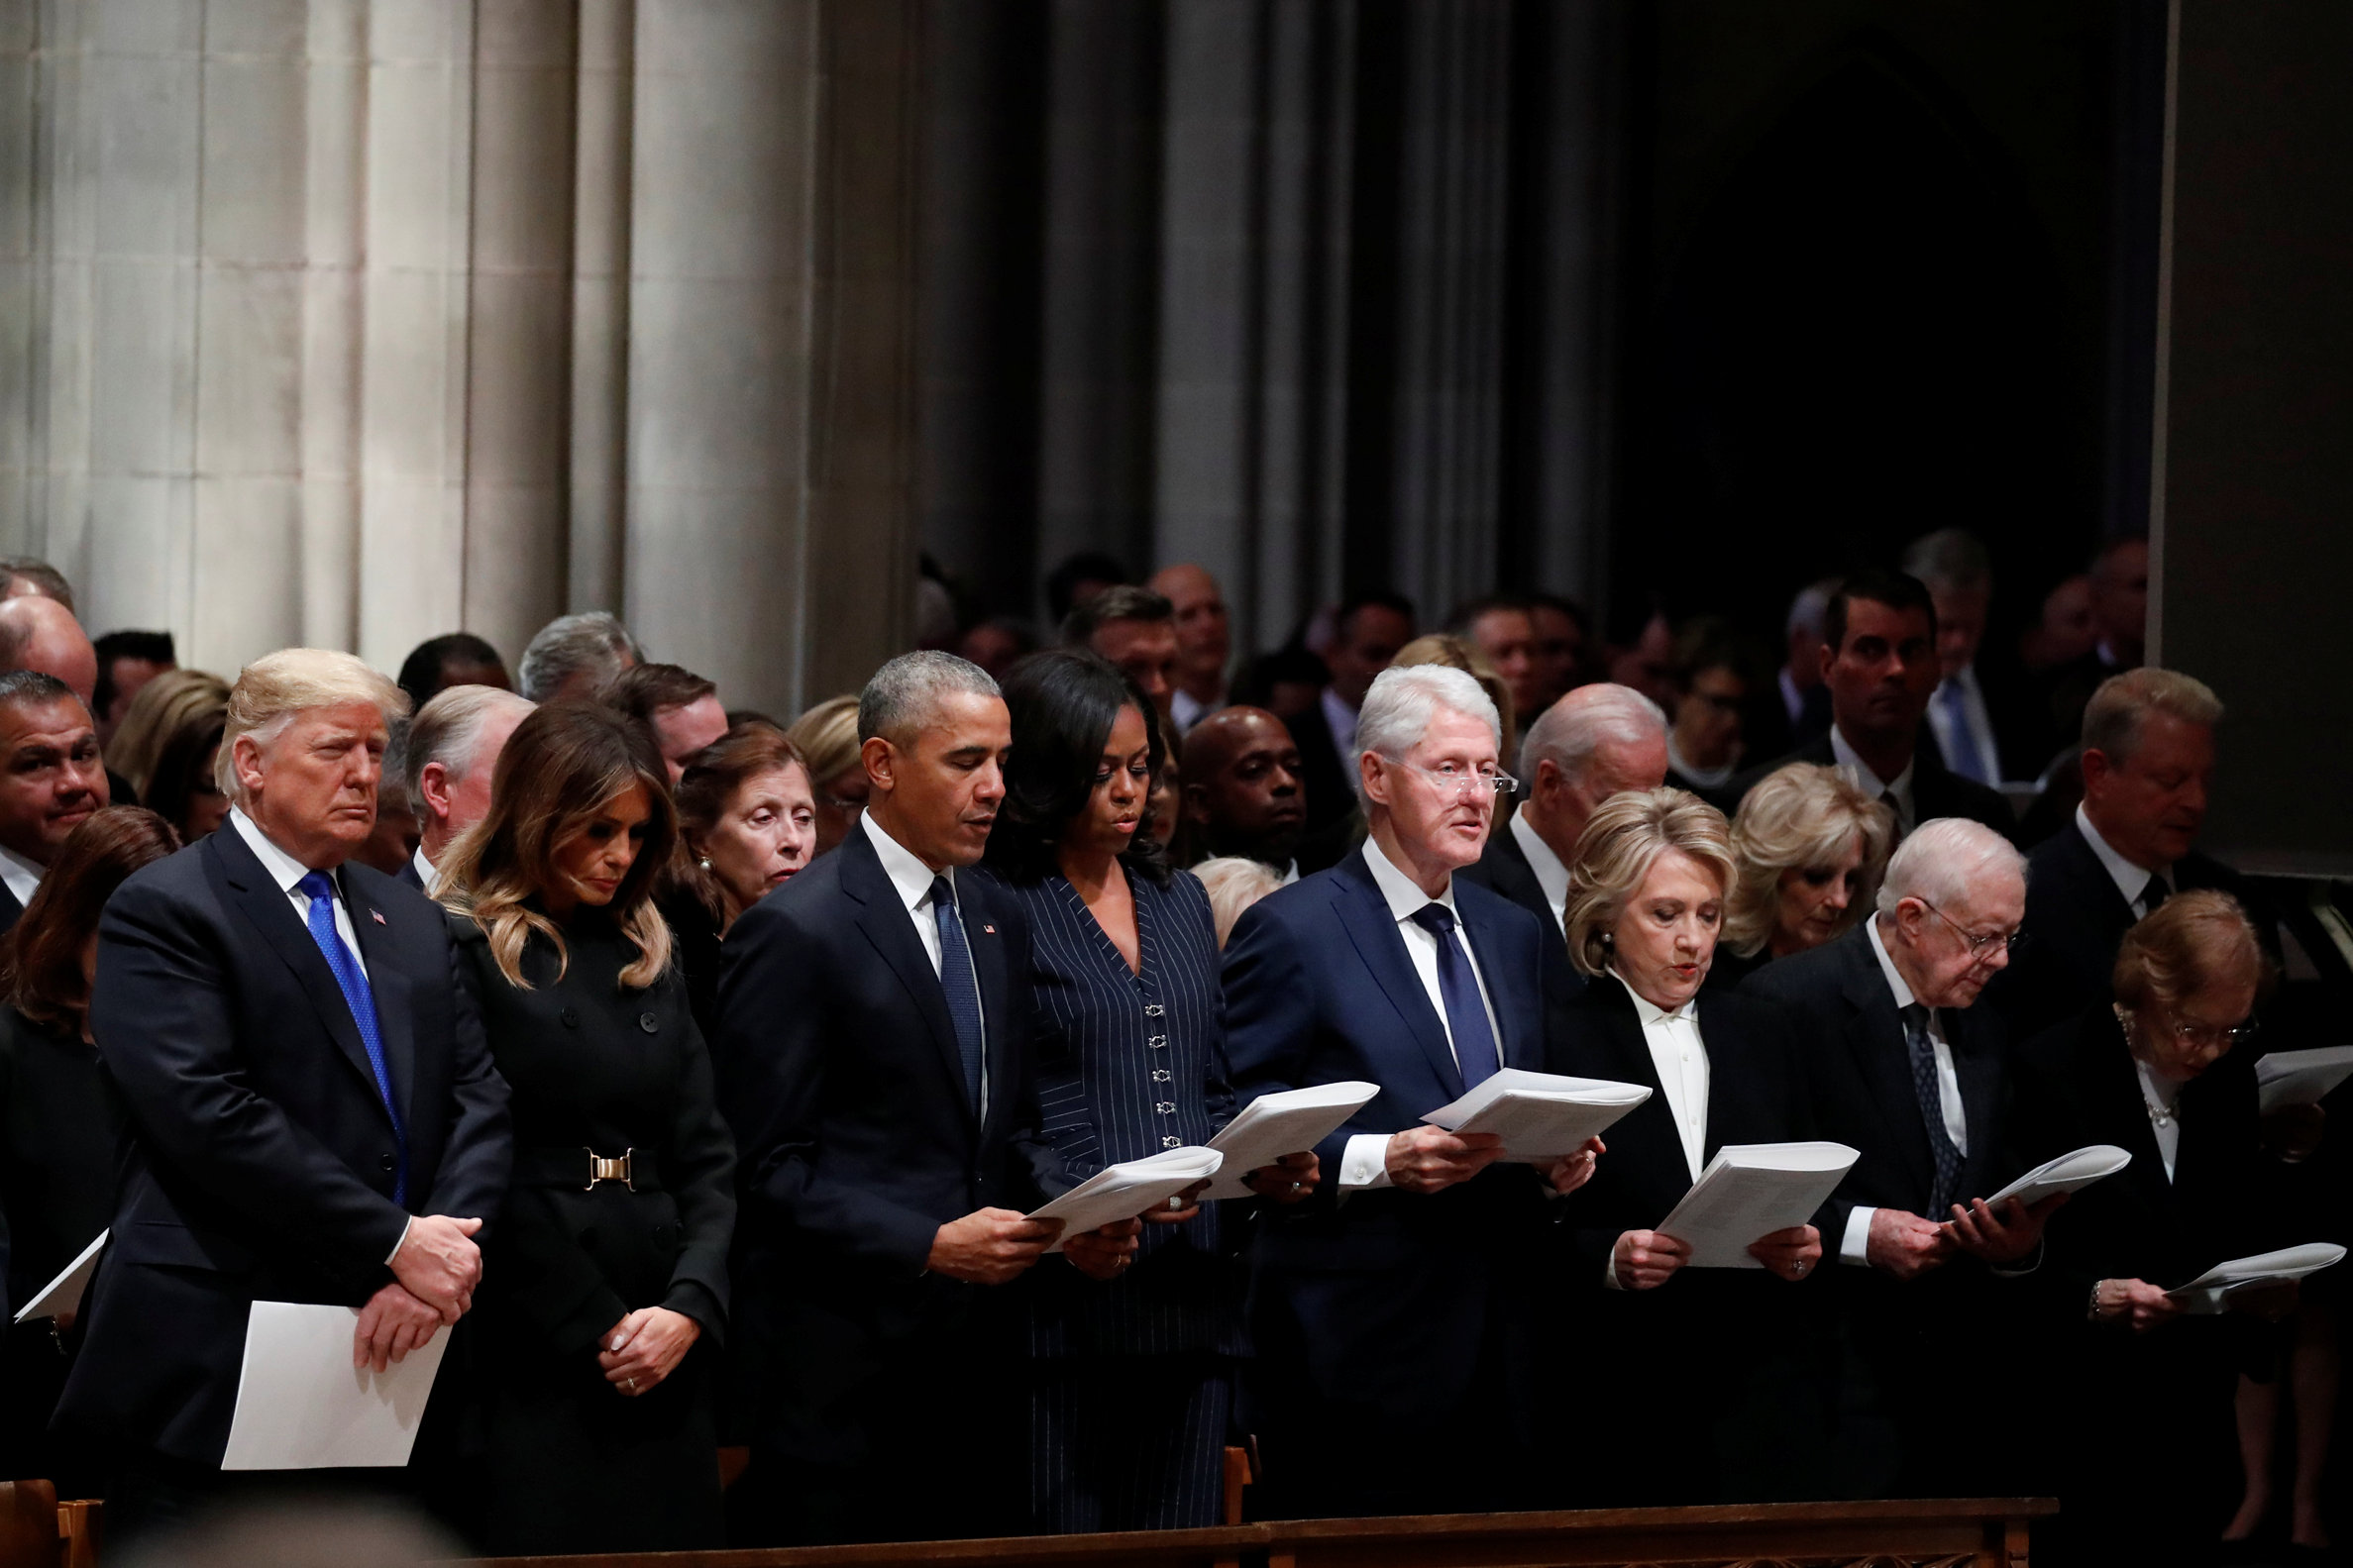 Donald and Melania Trump stand silent during George H.W. Bushs funeral as three former presidents and first ladies all recite the Apostles' Creed, Washington National Cathedral, December 5, 2018.